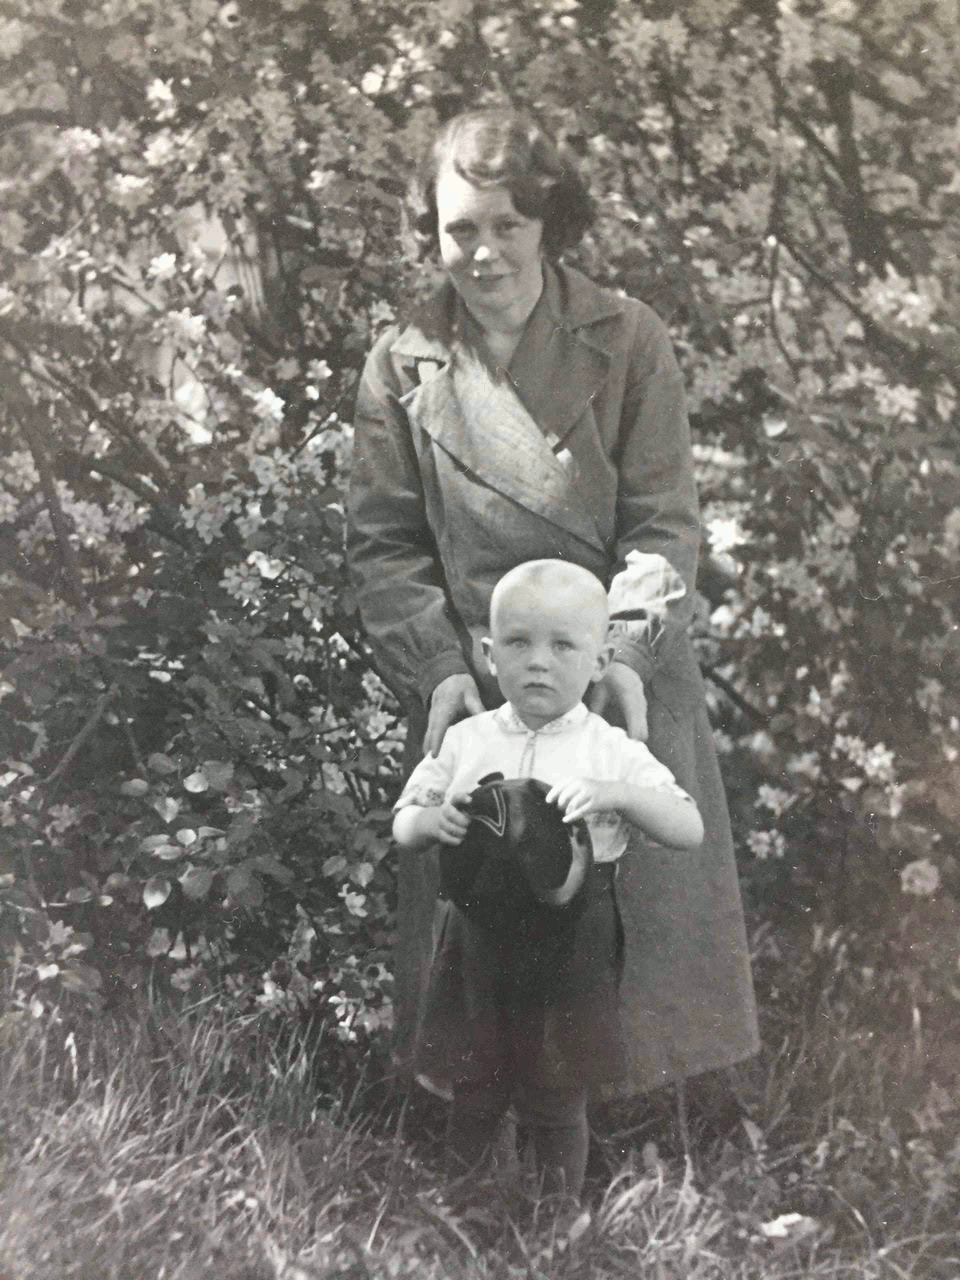 Andres and his mother Olga in late 1930s.